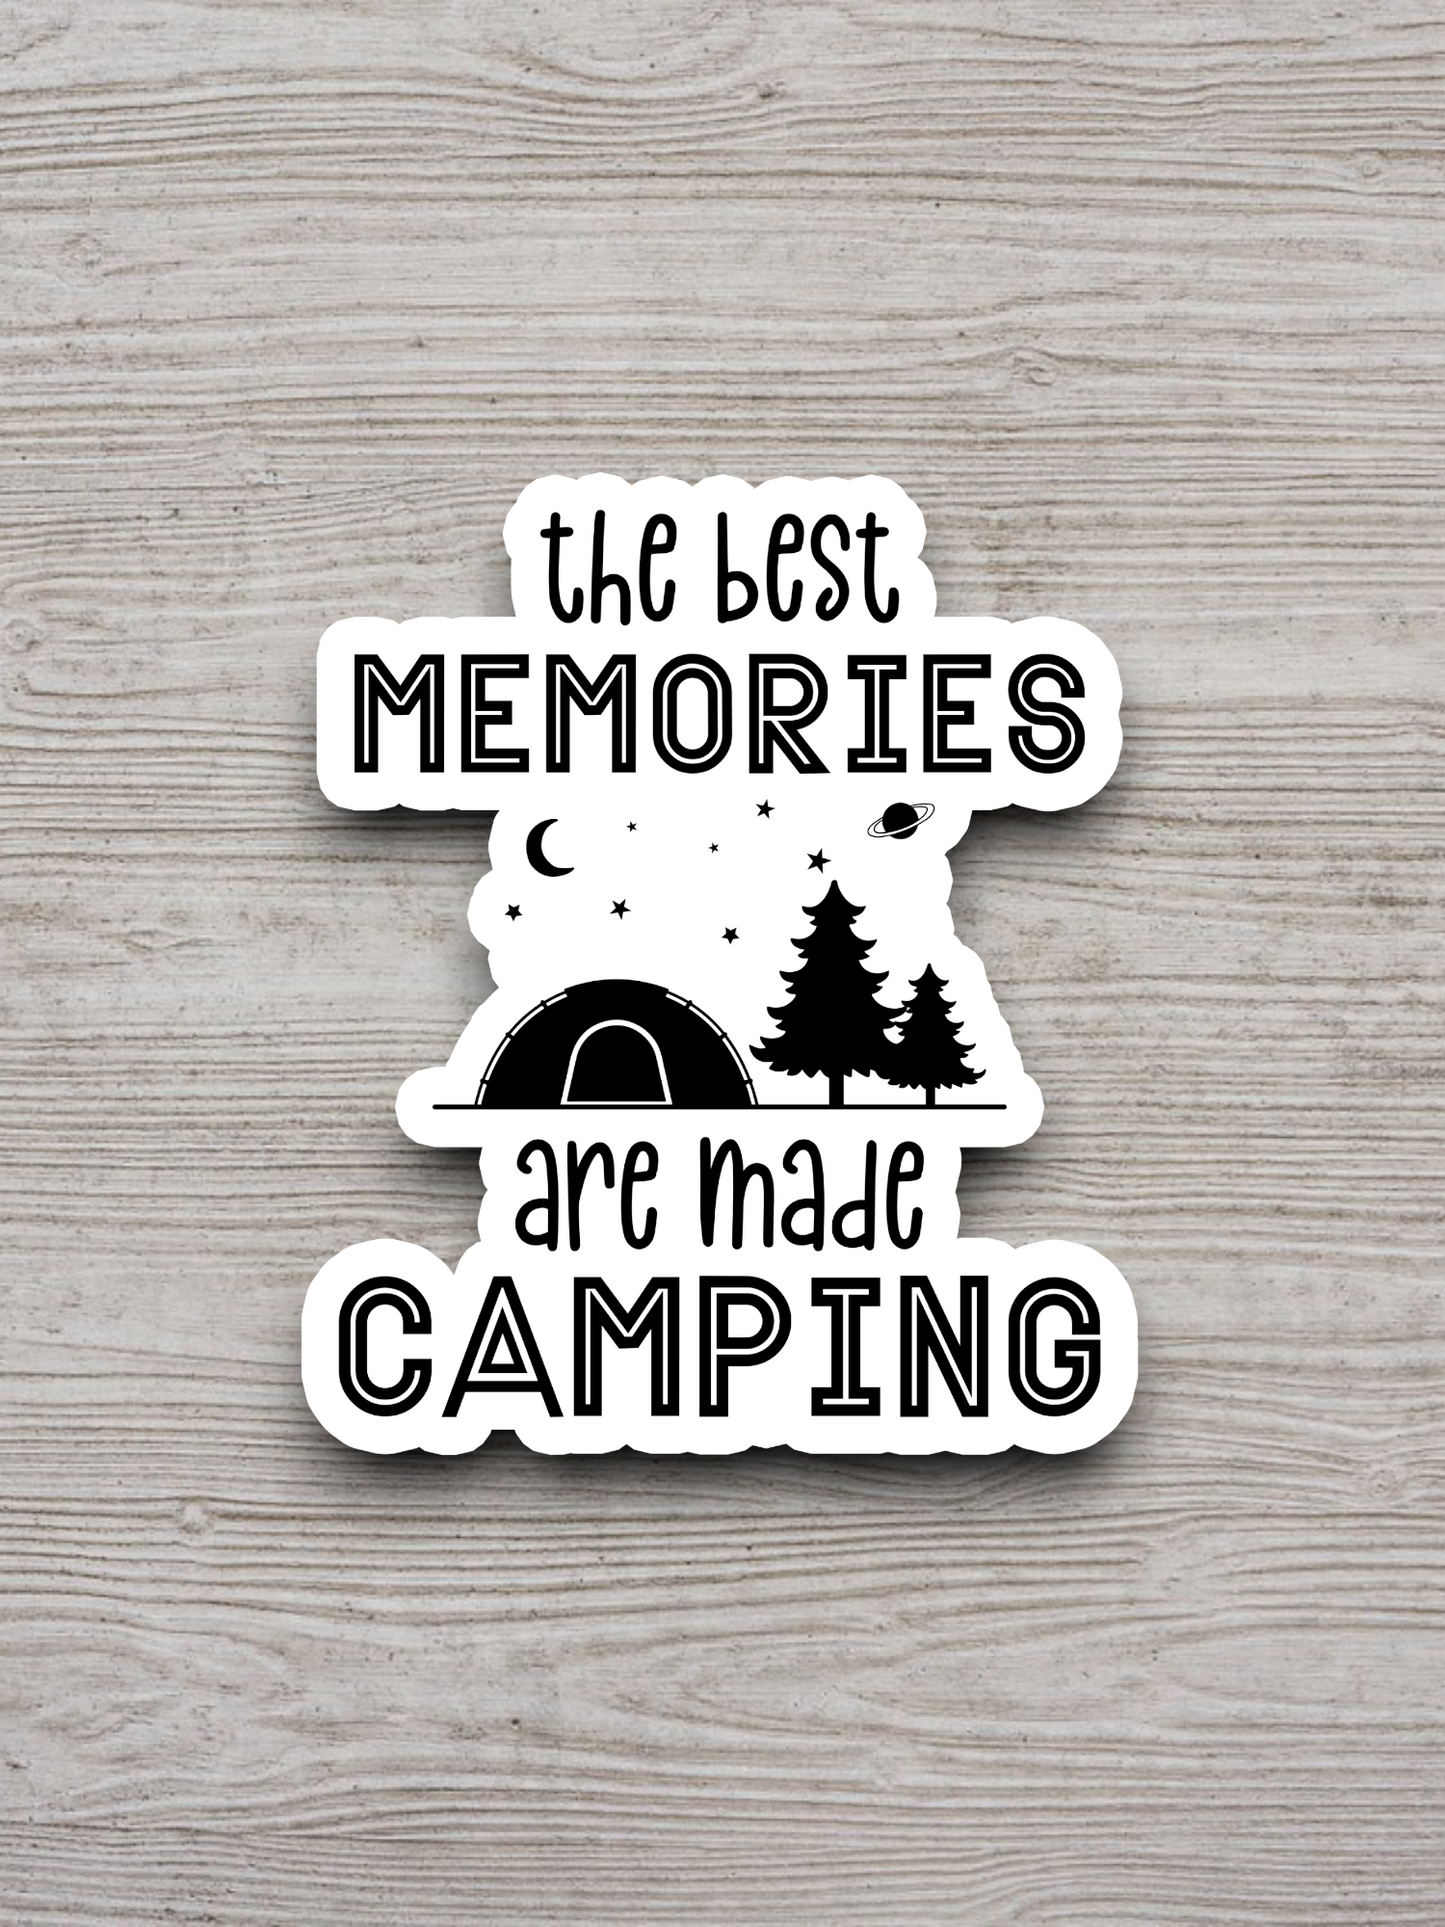 The Best Memories Are Made Camping  1 - Travel Sticker